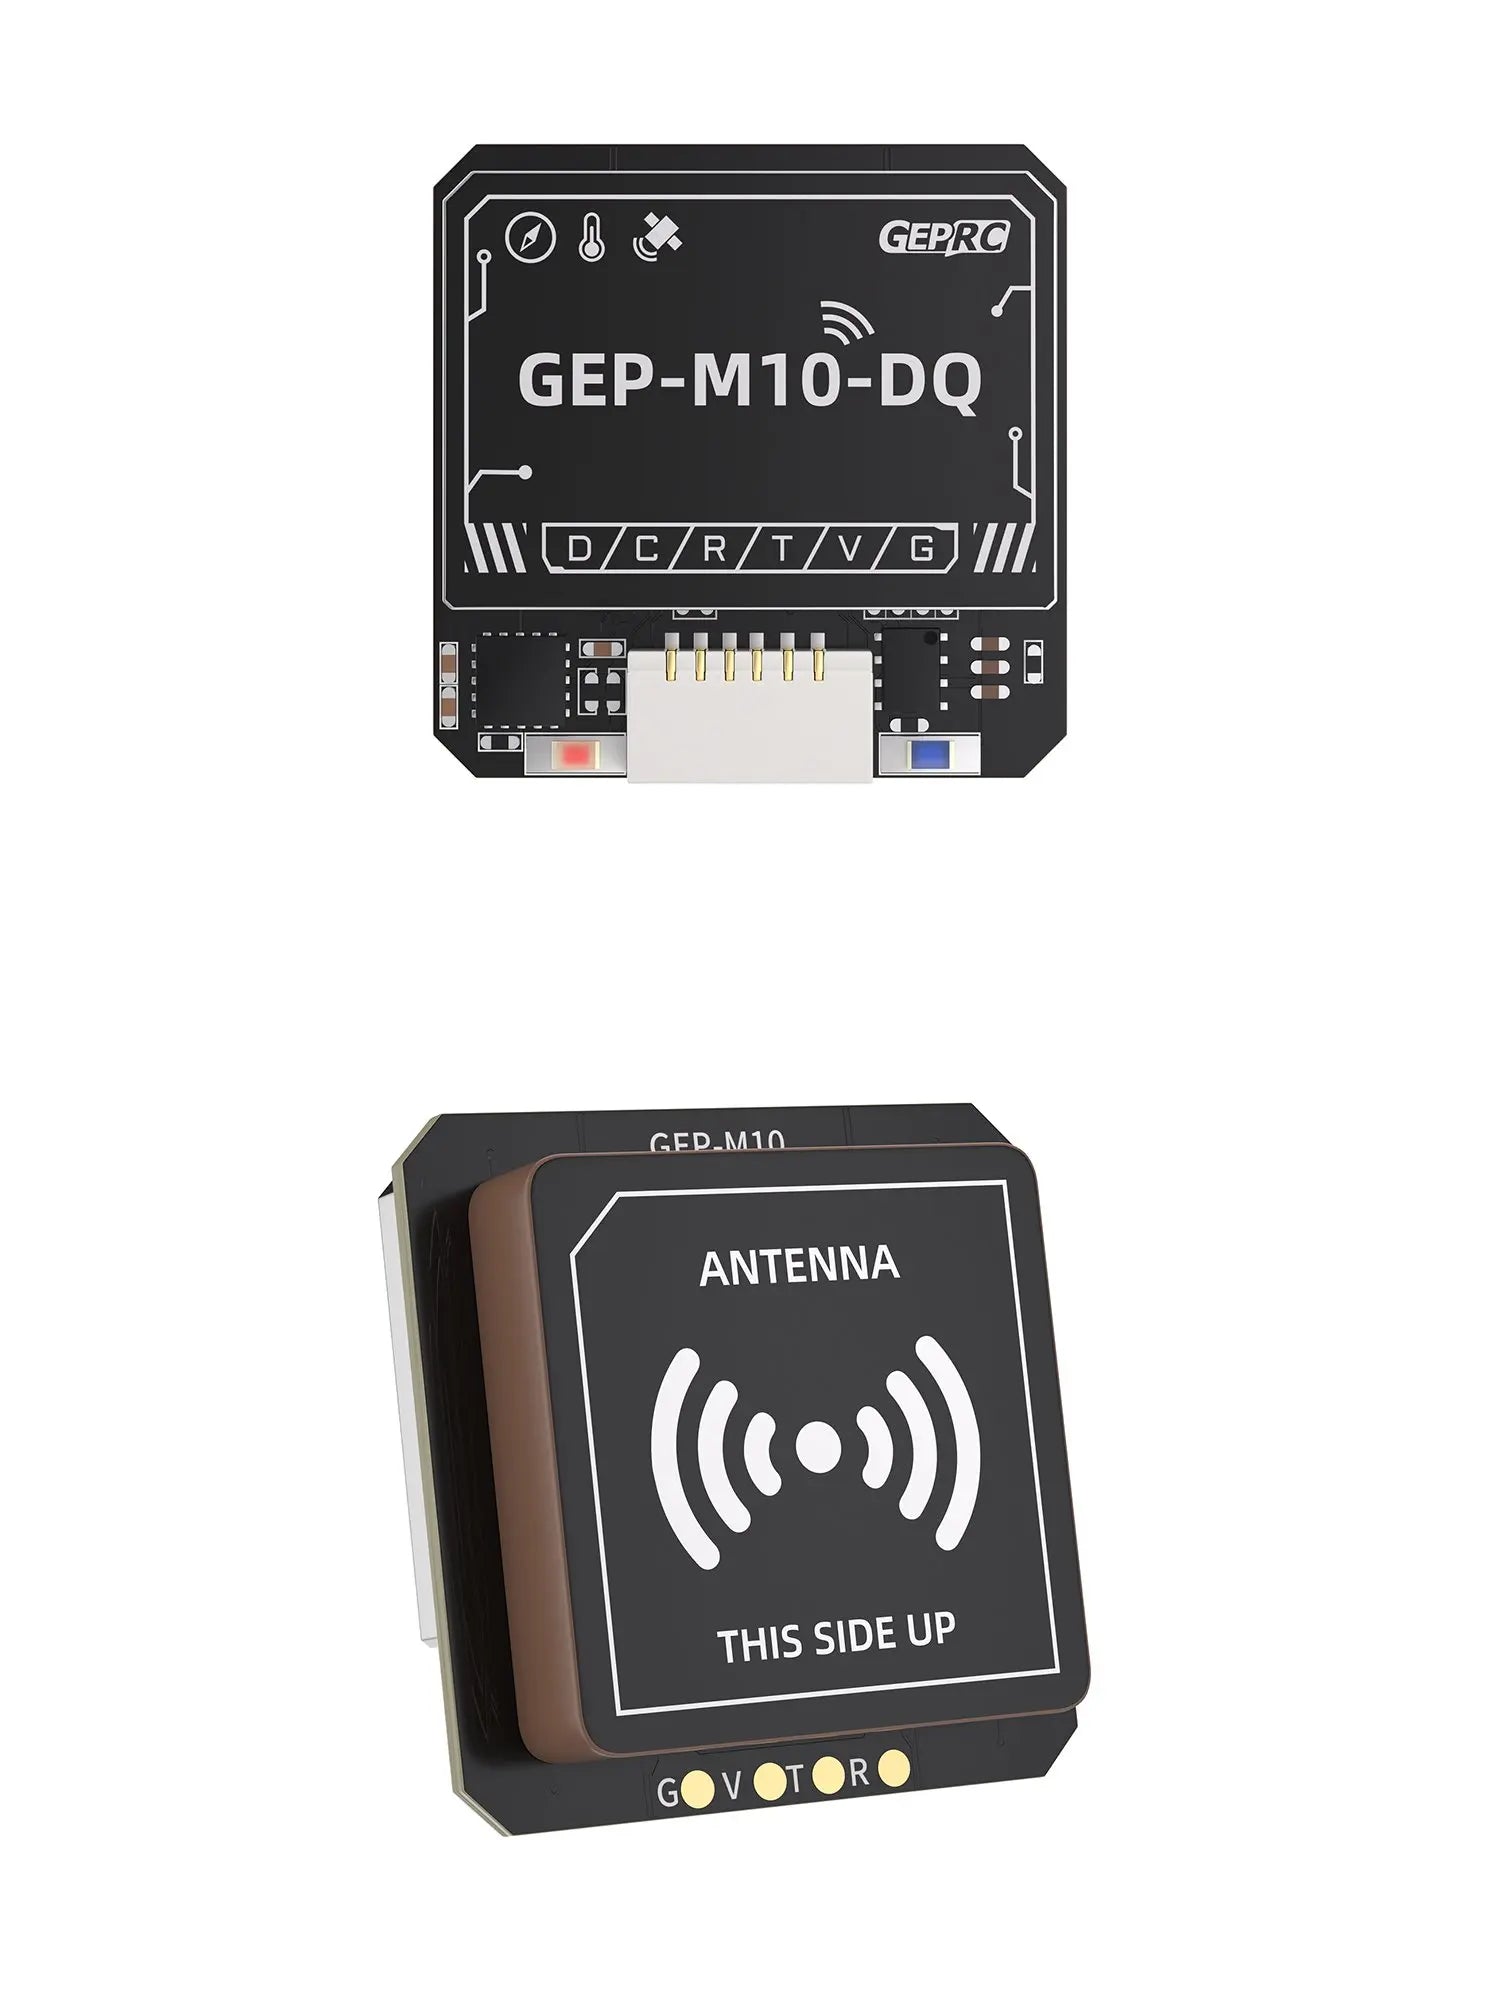 GEPRC GEP-M10 Series GPS, it can meet the needs of most FPV drones, multi-rotors,